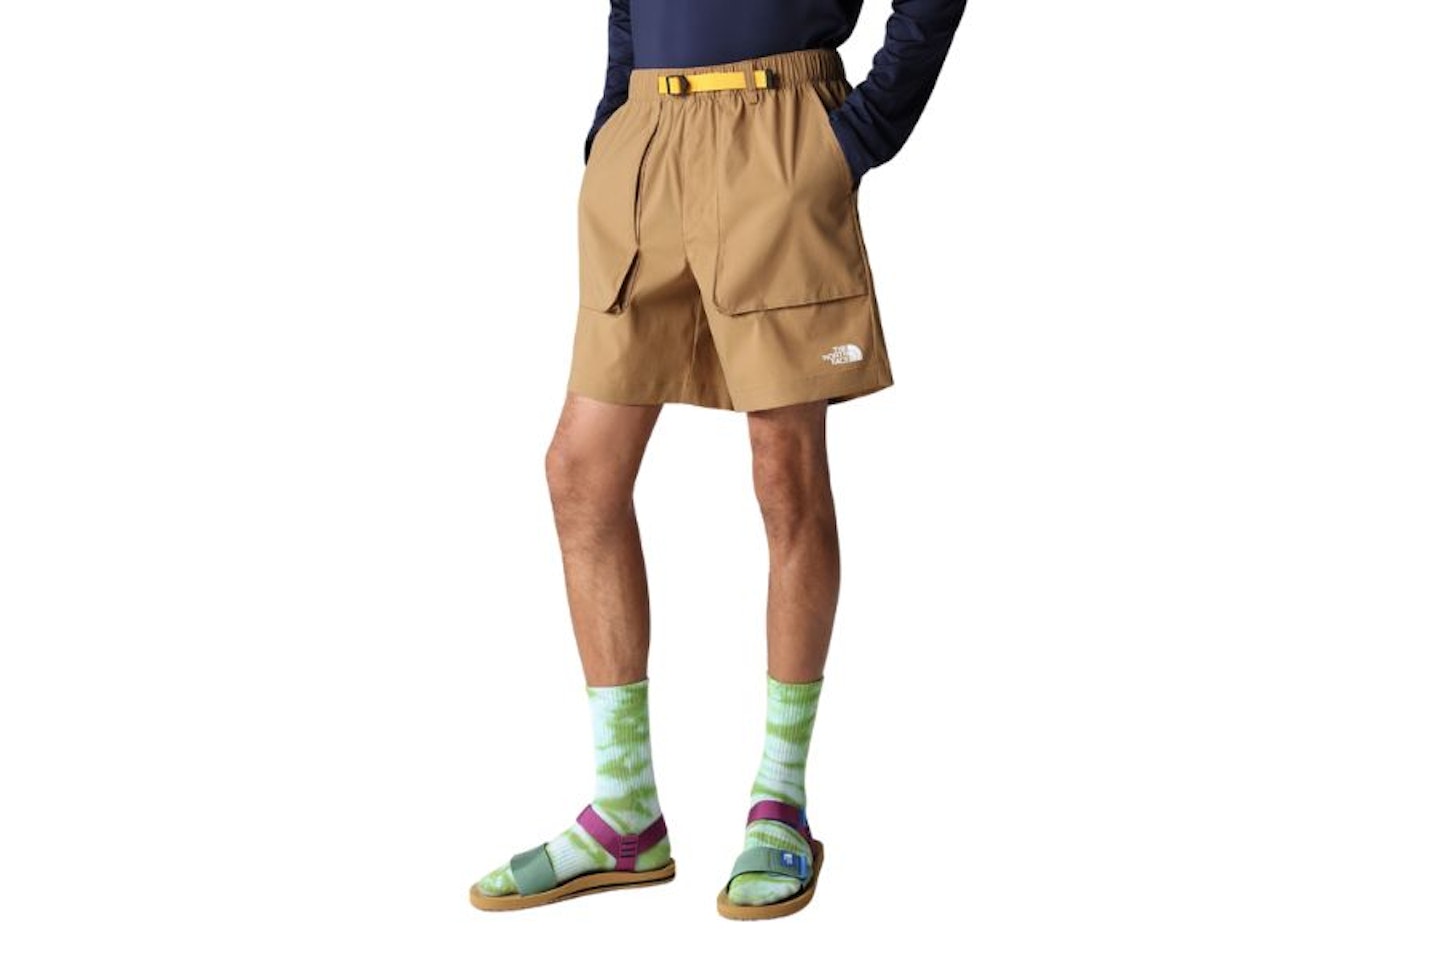 The North Face Men's Class V Ripstop Shorts